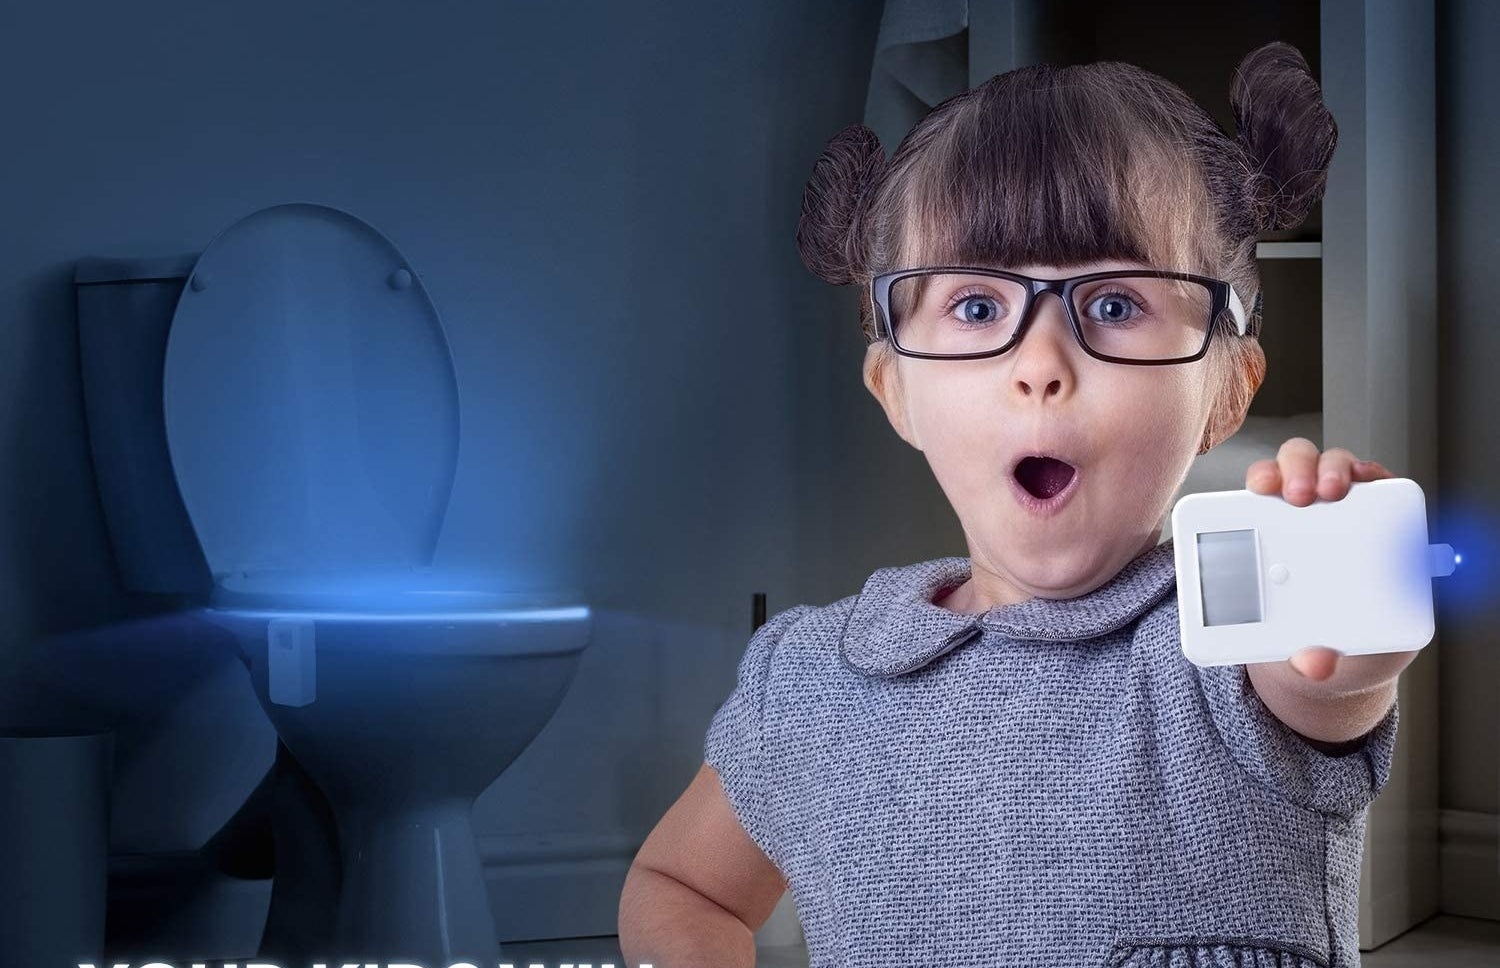 Child model holding toilet light in their hand as blue light glows from toilet 